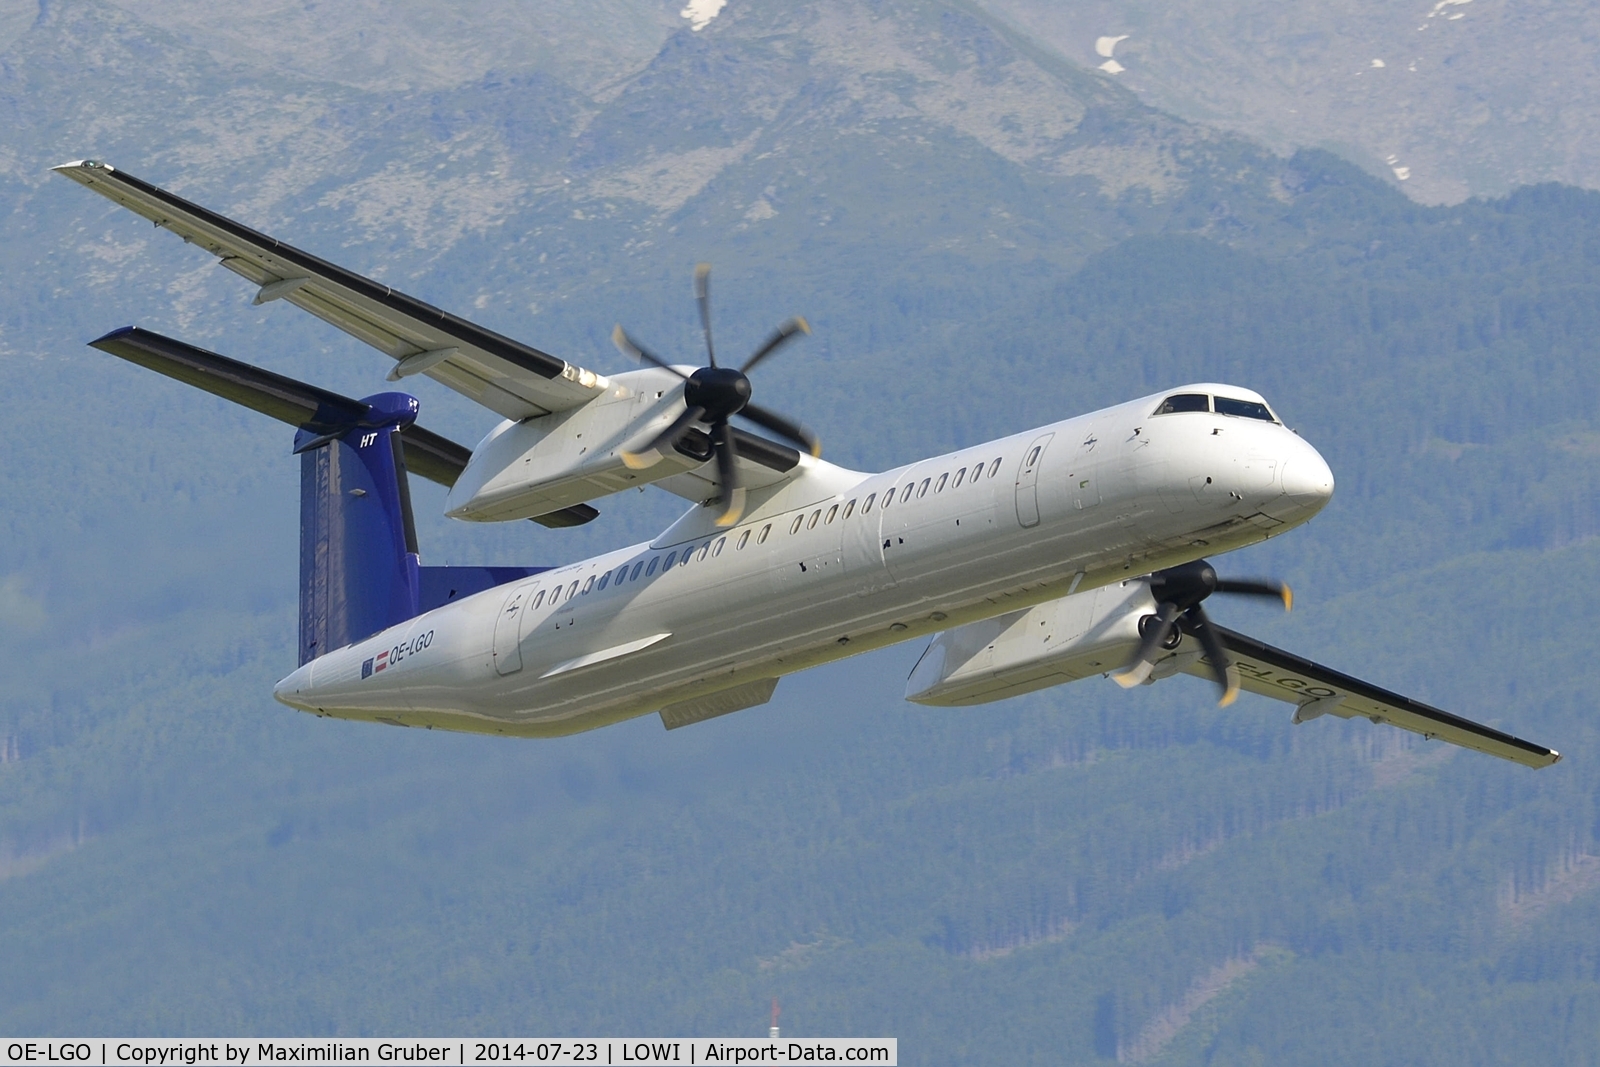 OE-LGO, 2009 De Havilland Canada DHC-8-400Q Dash 8 C/N 4281, Overshoot of the new delivered OE-LGO of Tyrolean Airways